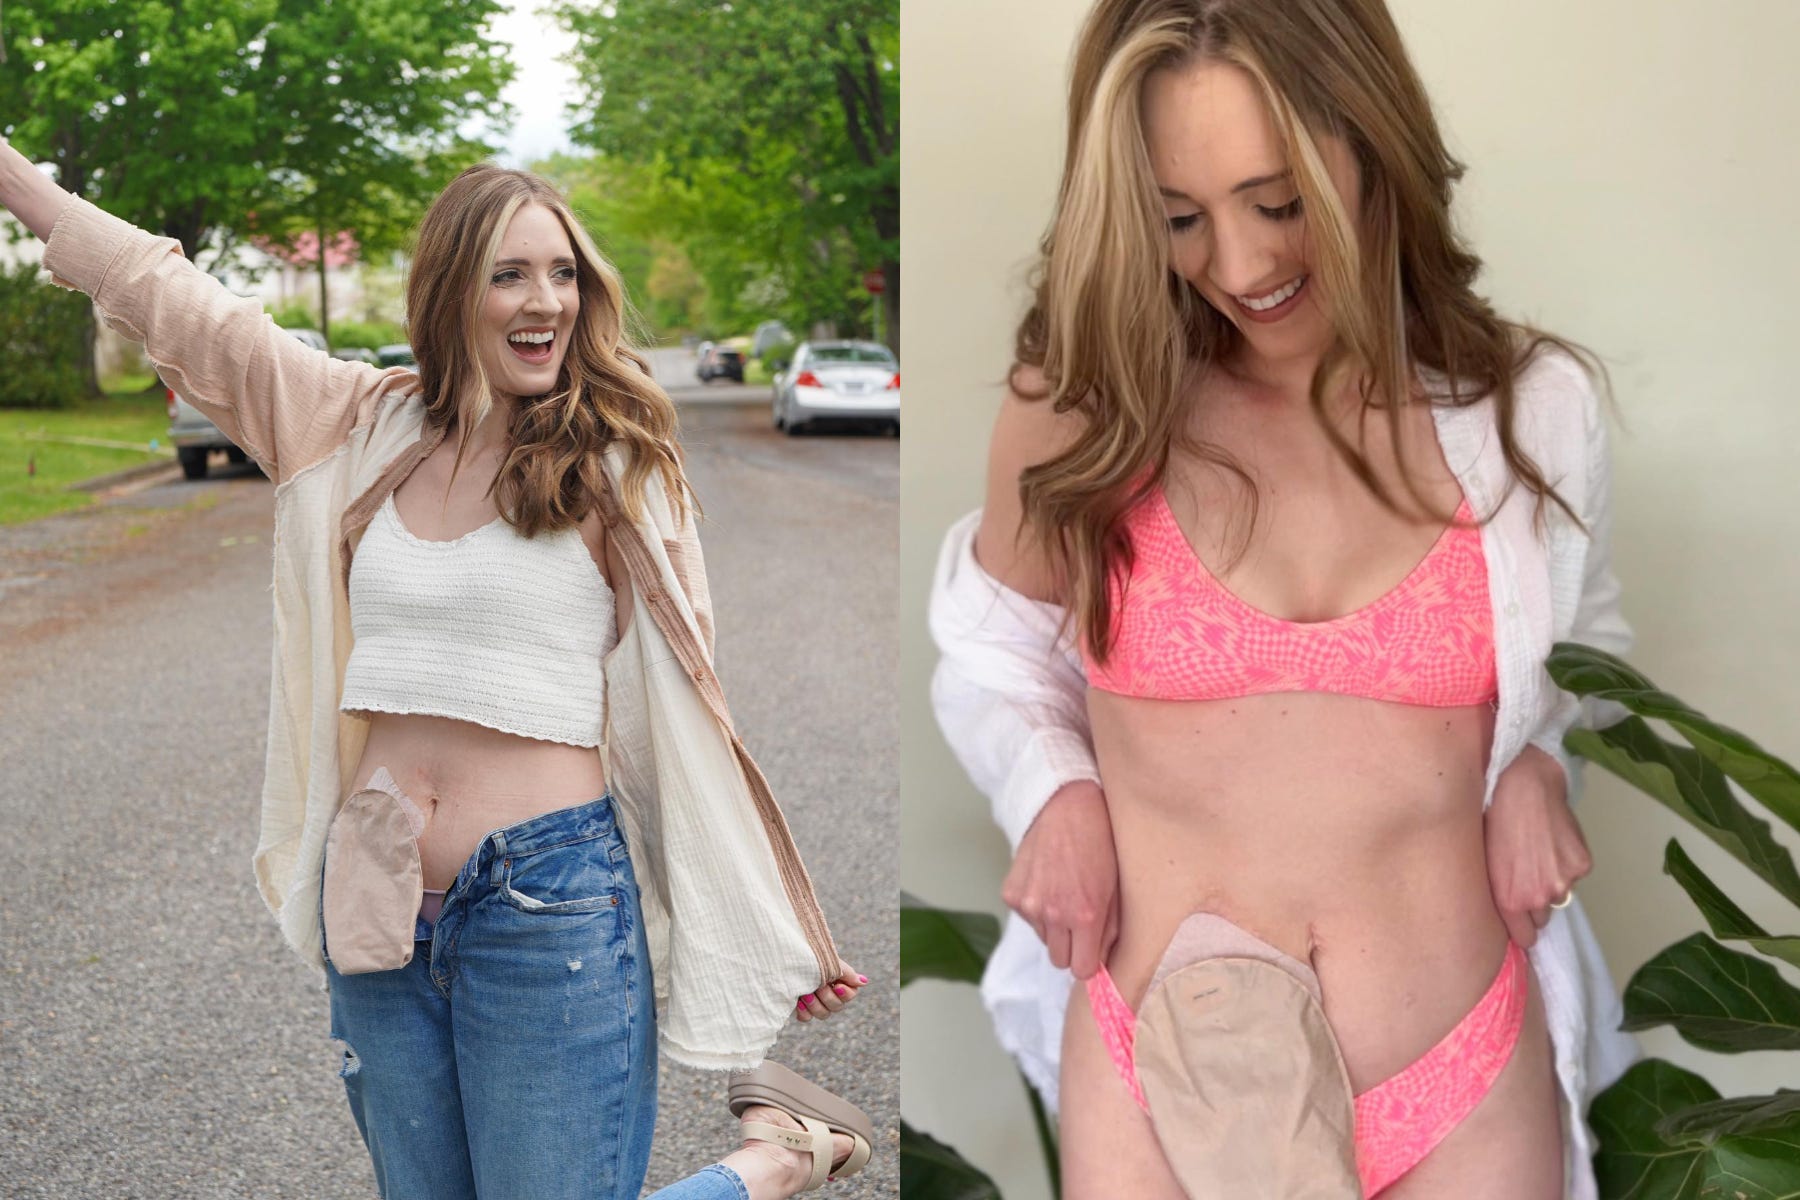 Mum with stoma bag shares bikini pictures to celebrate 'second